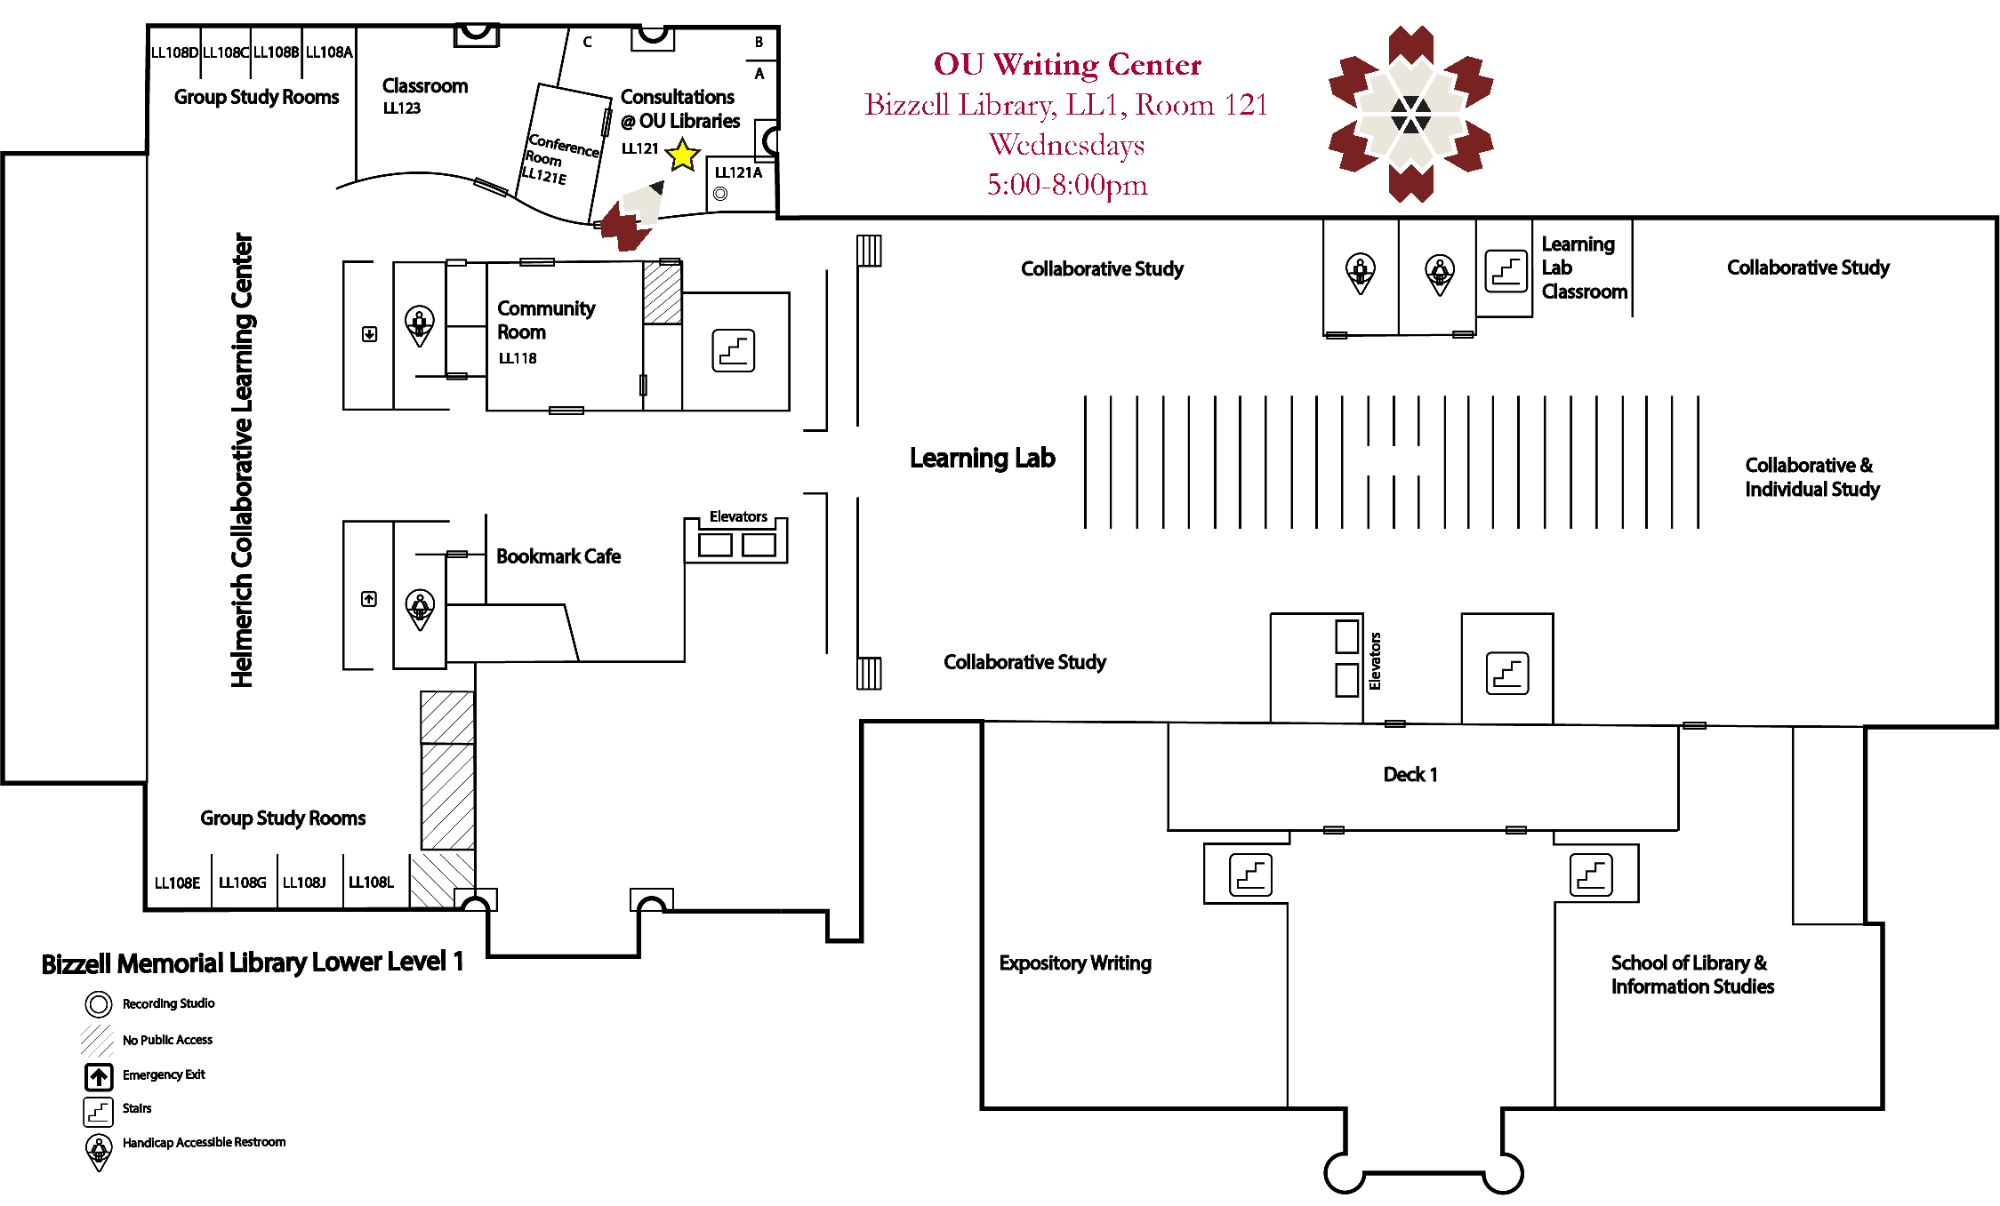 map of Writing Center satellite location in Bizzell Library